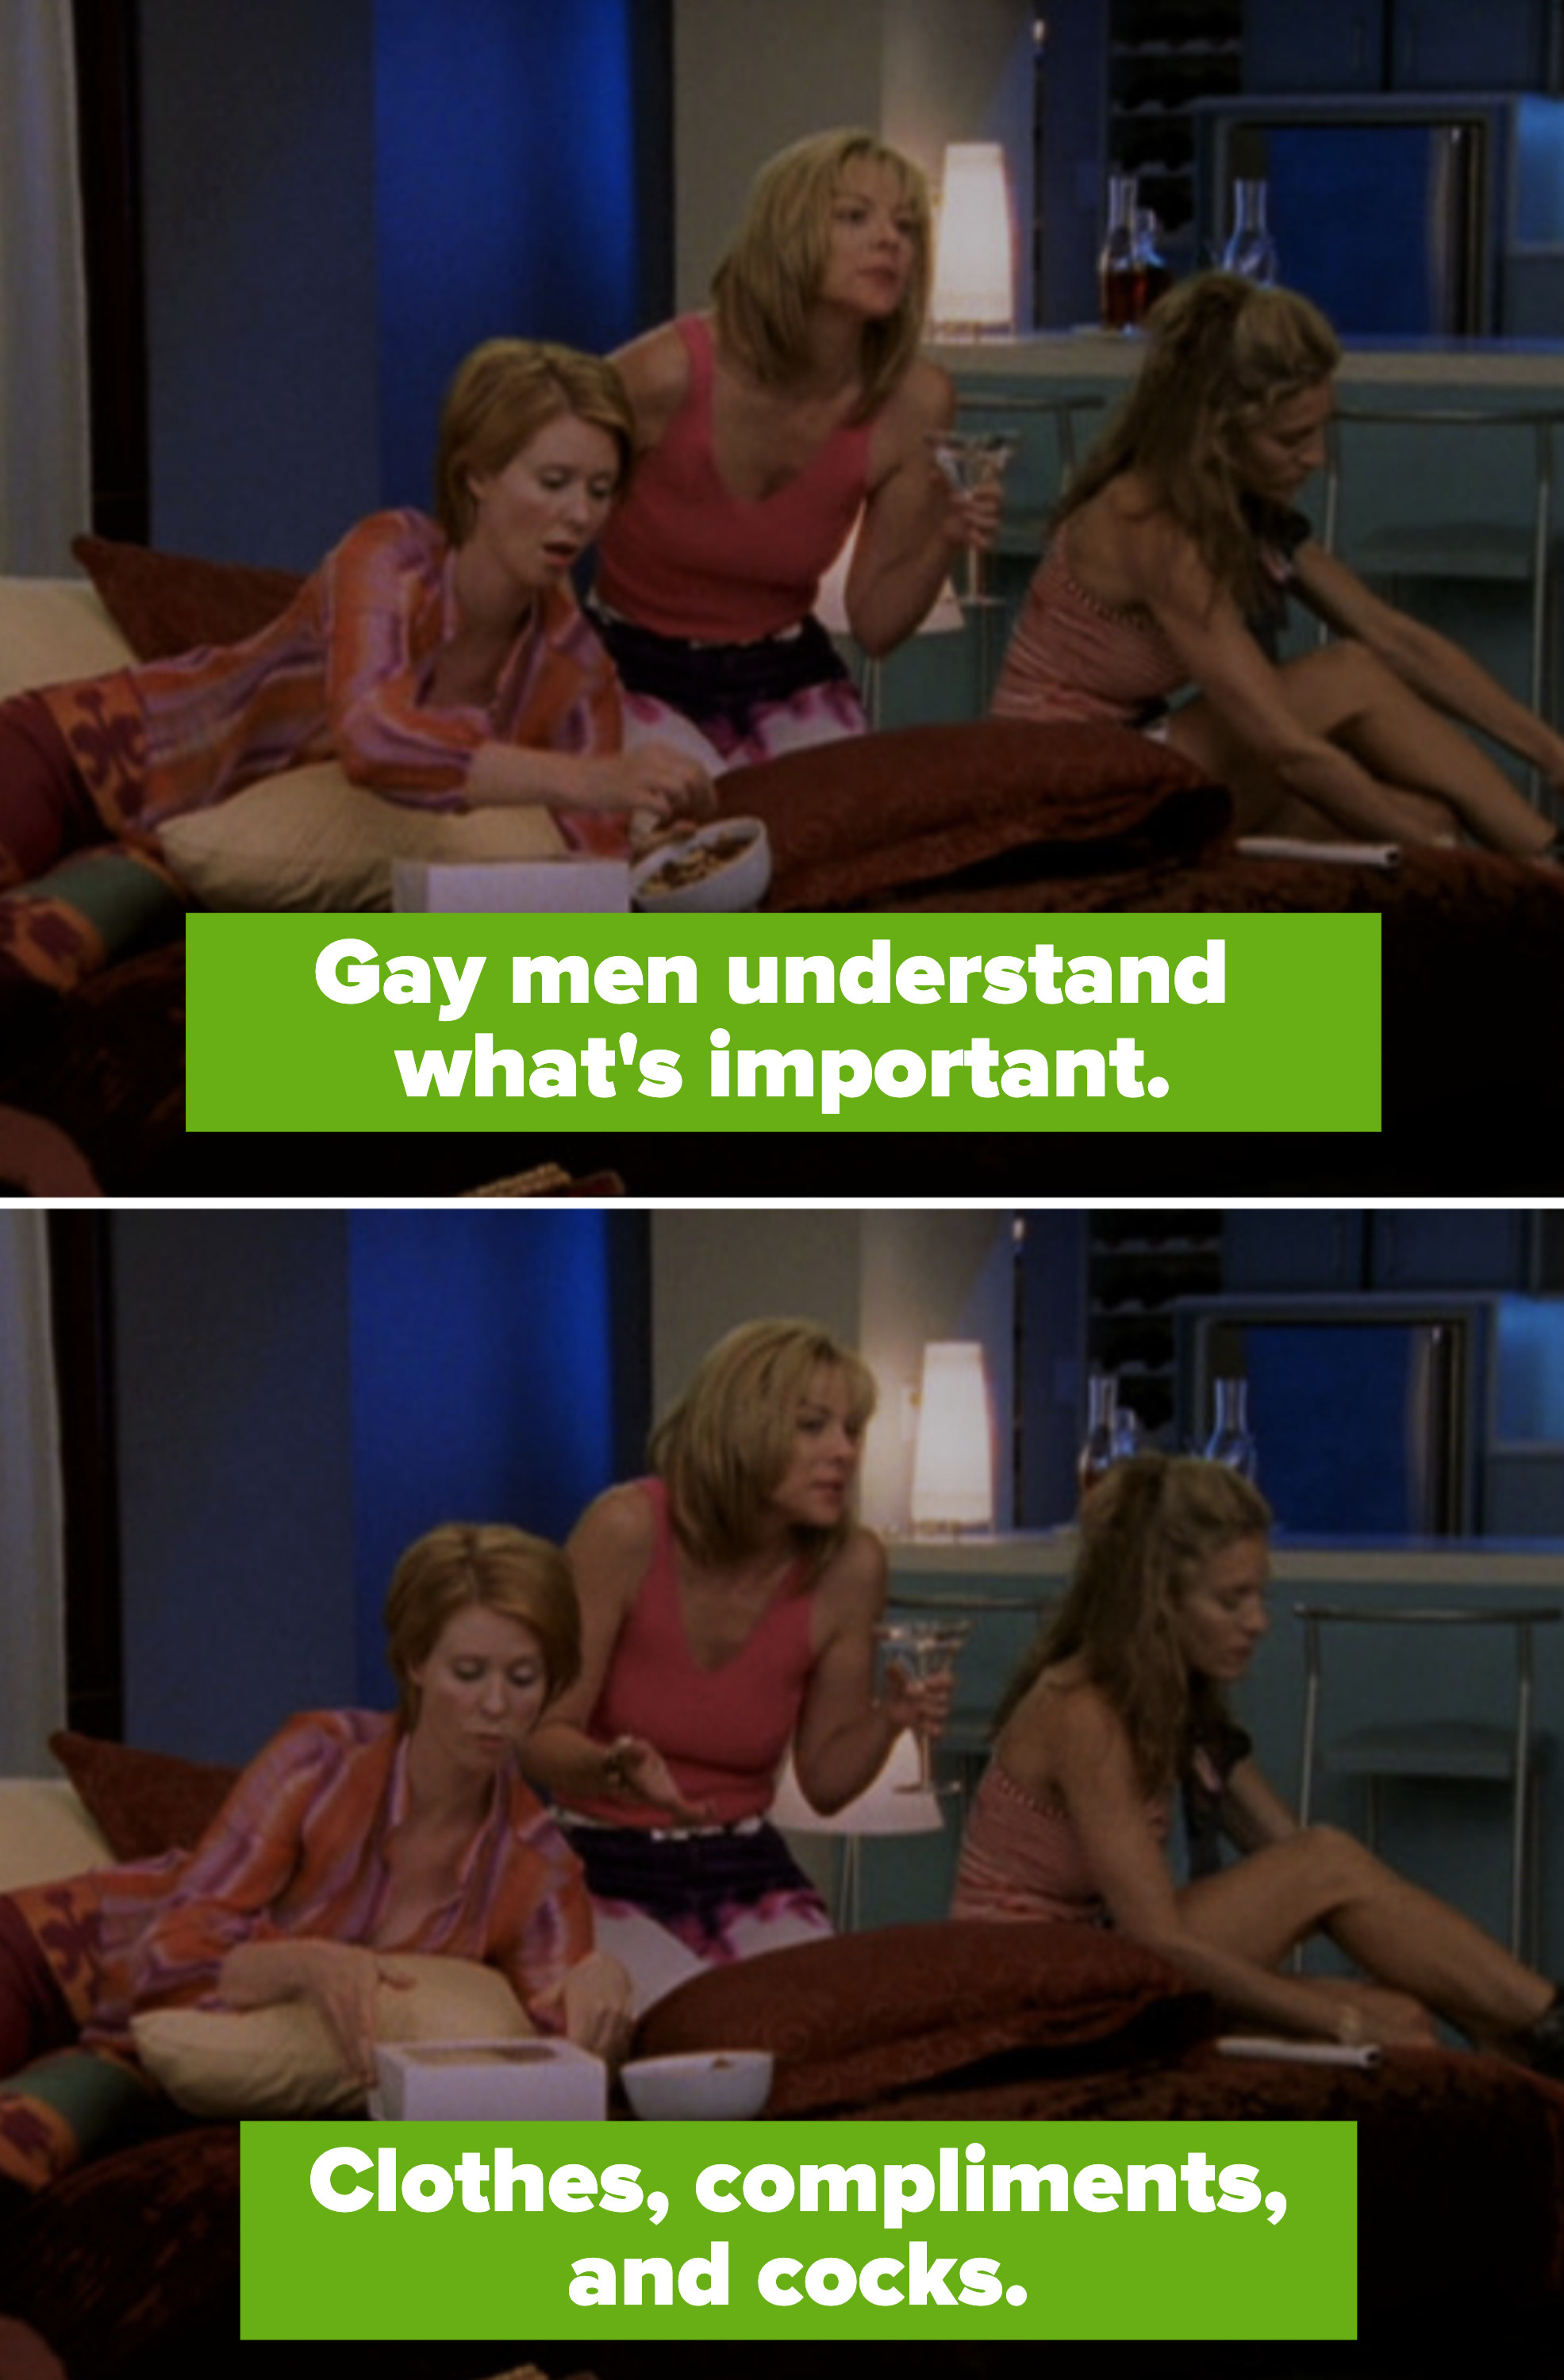 Samantha in her apartment telling Carrie and Miranda: &quot;Gay men understand what&#x27;s important. Clothes, compliments, and cocks&quot;